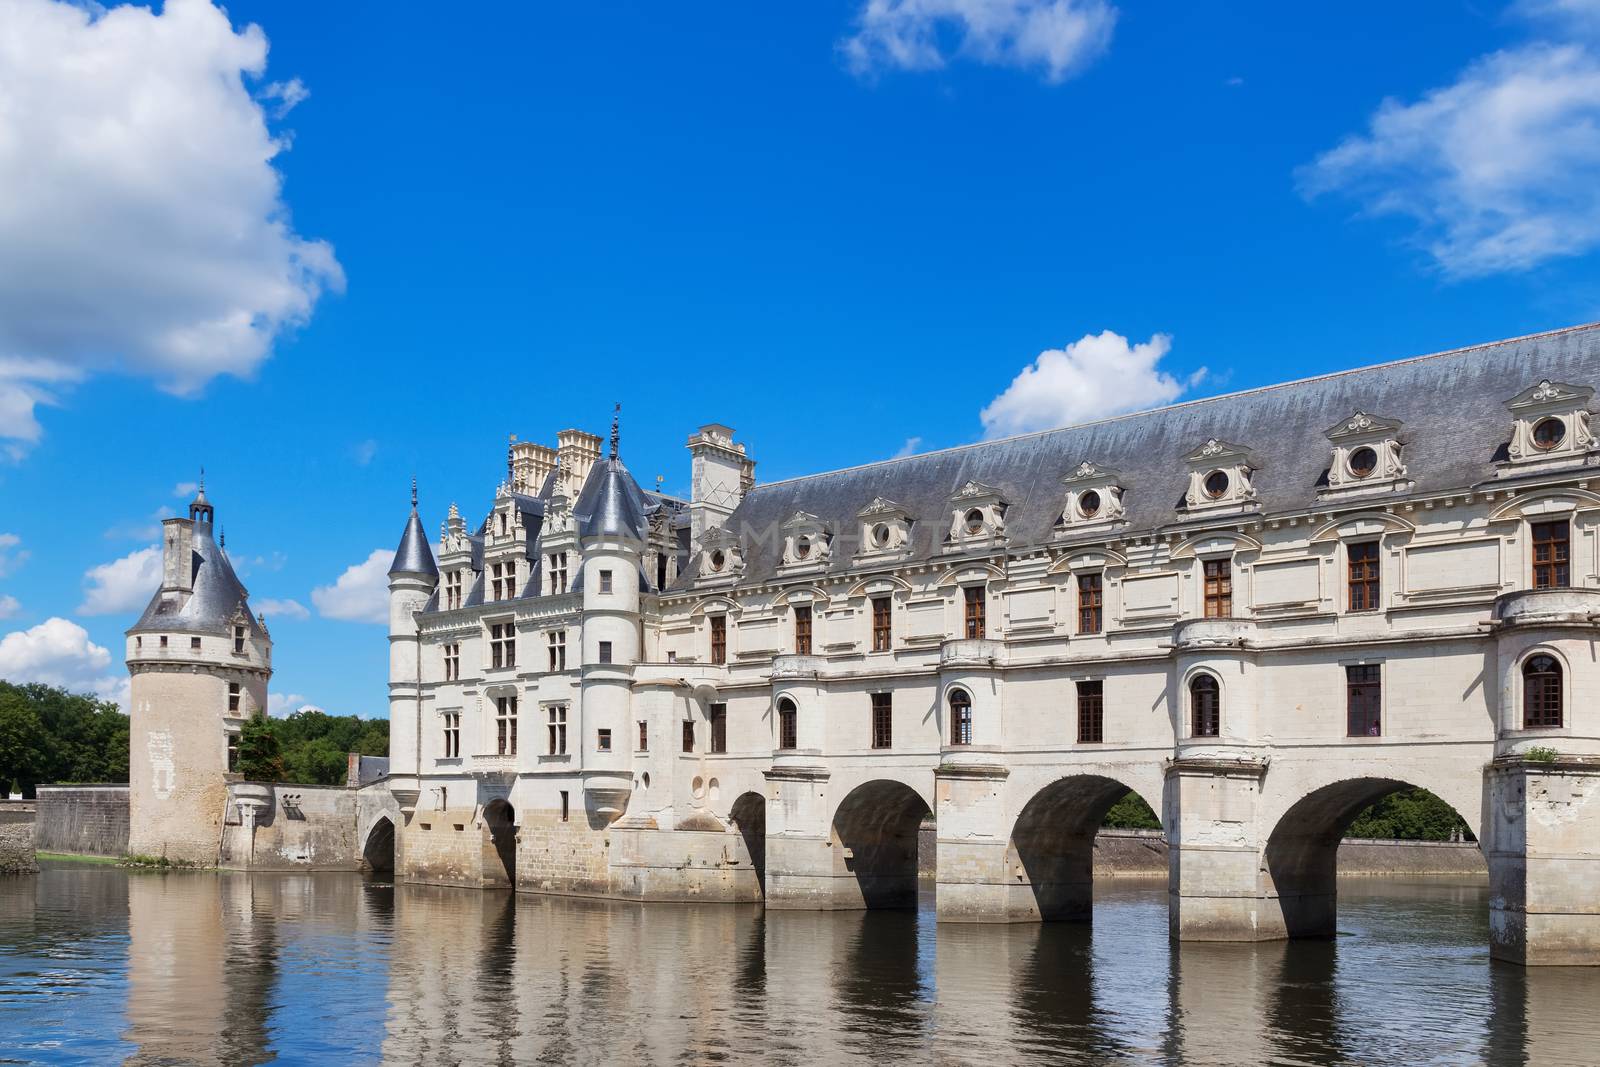 Chenonceau castle in the Loire Valley, France by anikasalsera